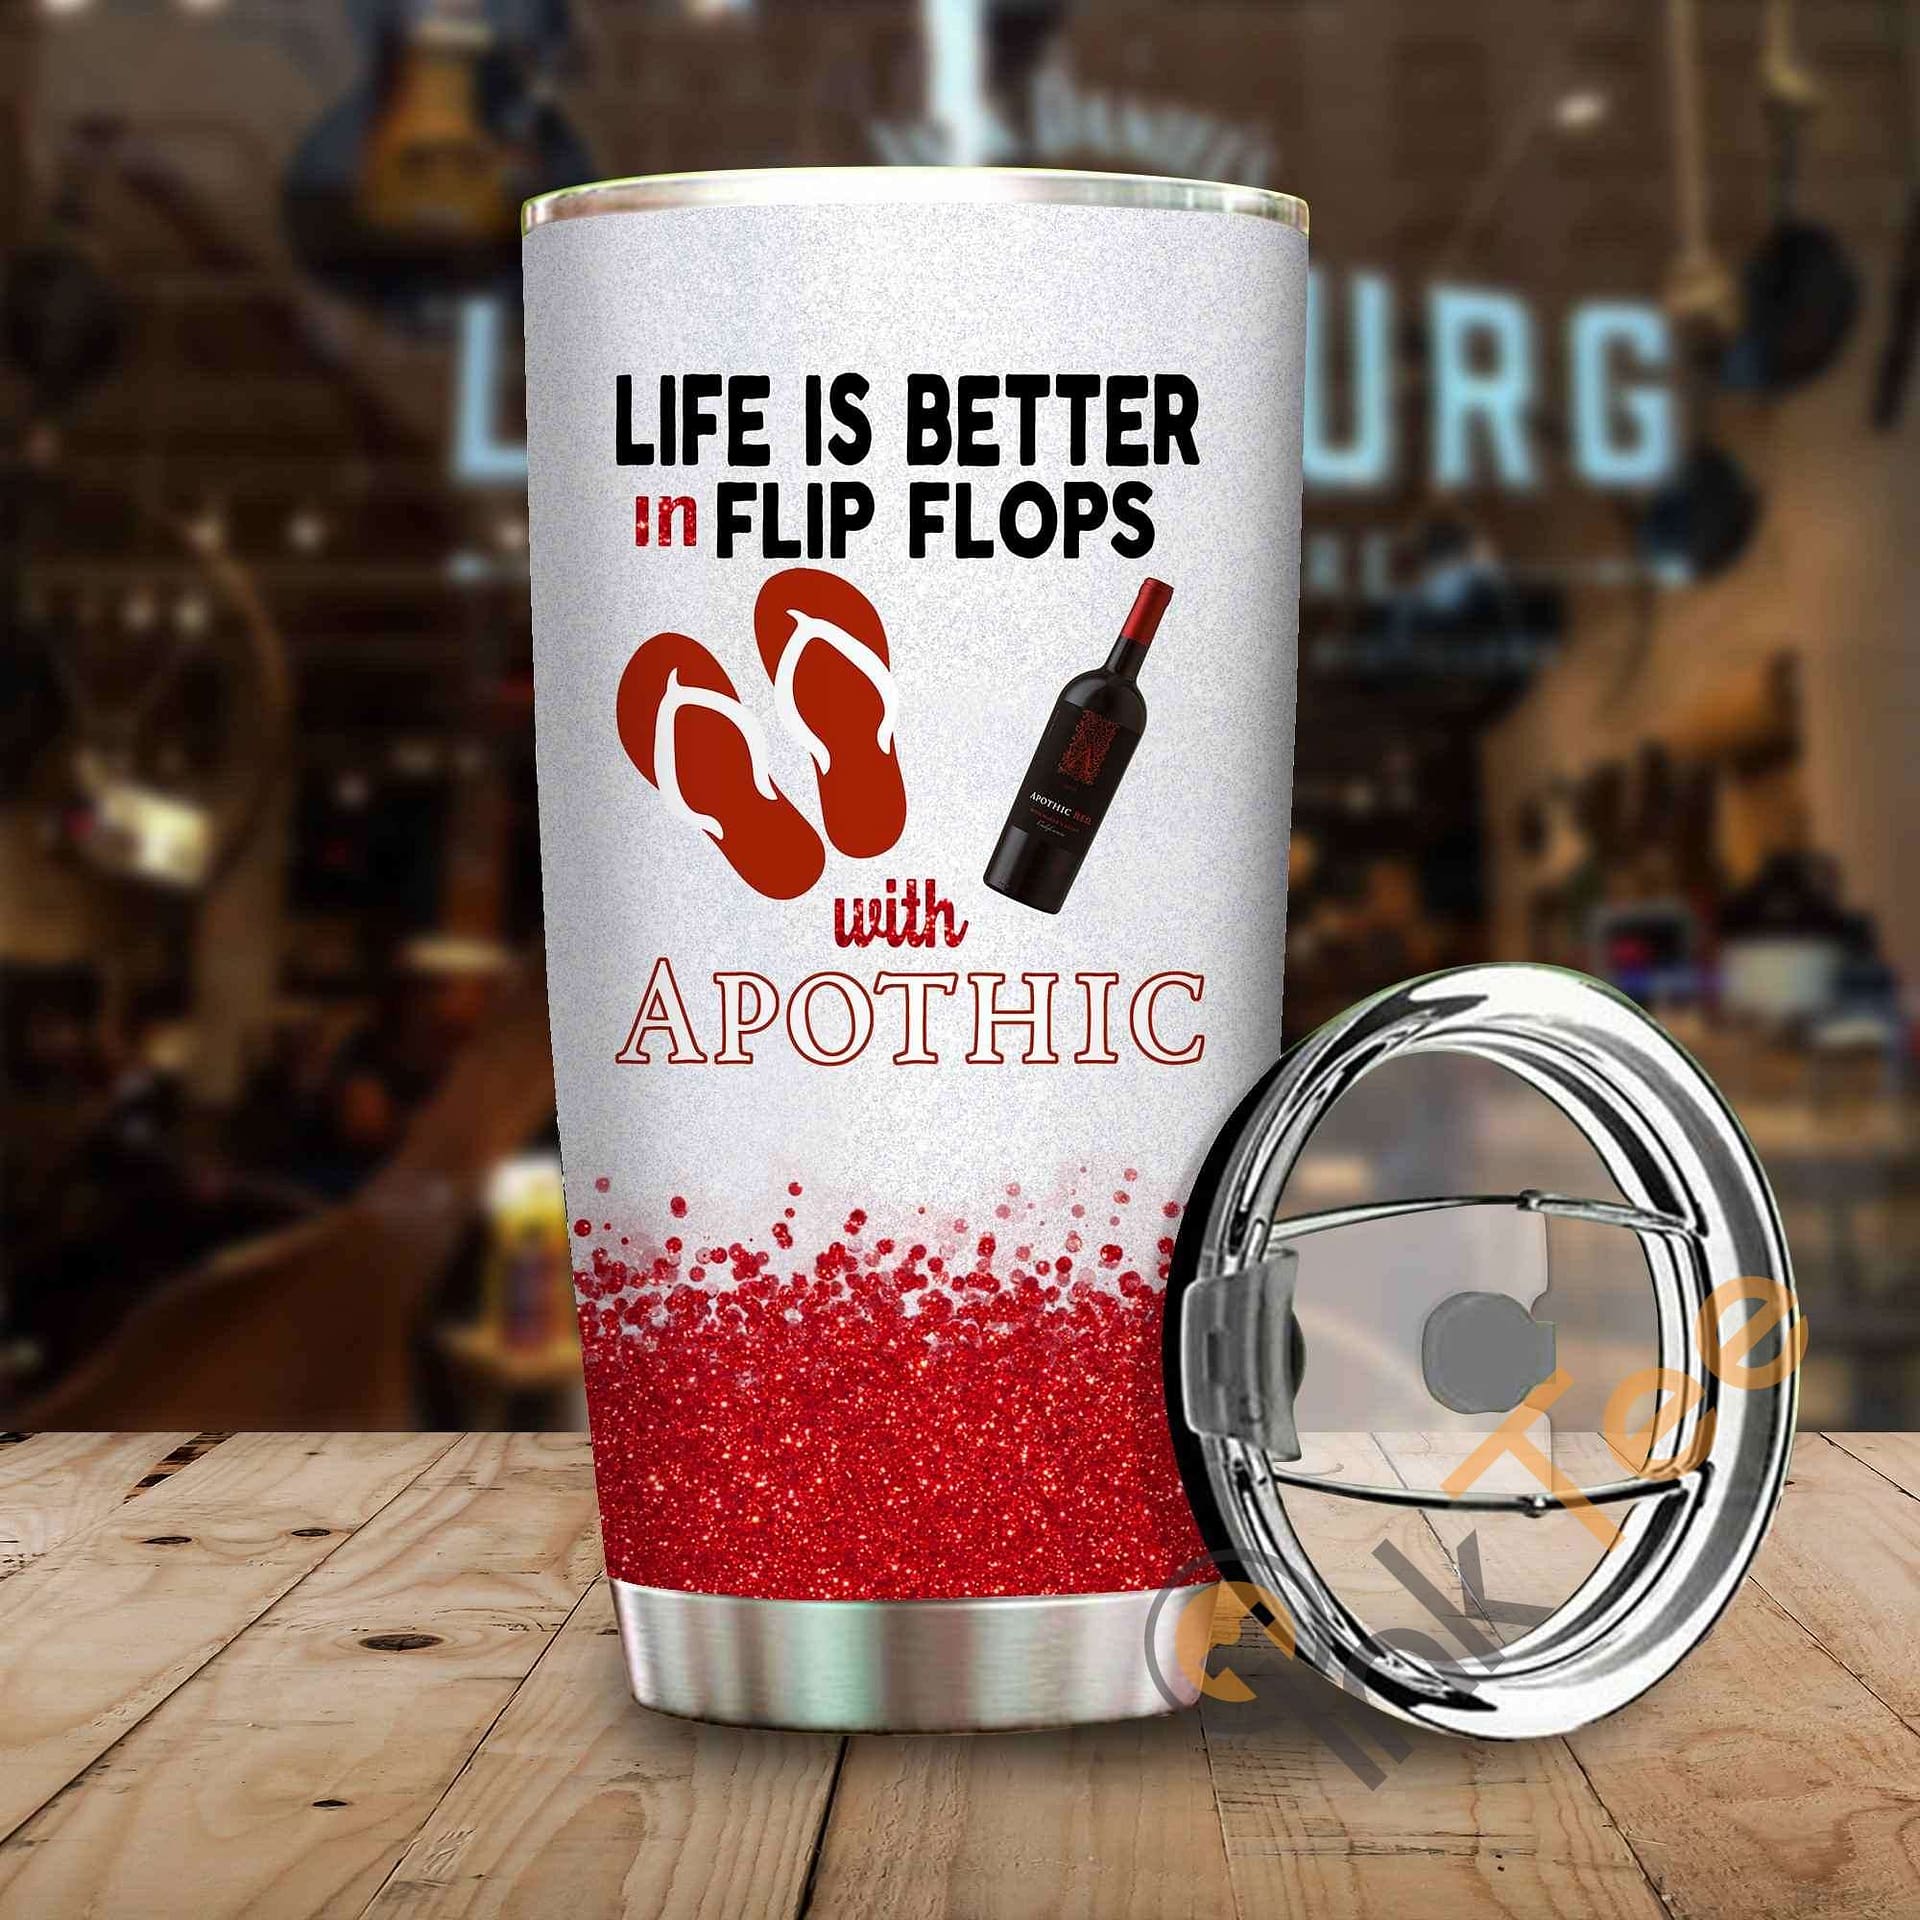 Life Is Better In Flip Flops With Apothic Amazon Best Seller Sku 3964 Stainless Steel Tumbler